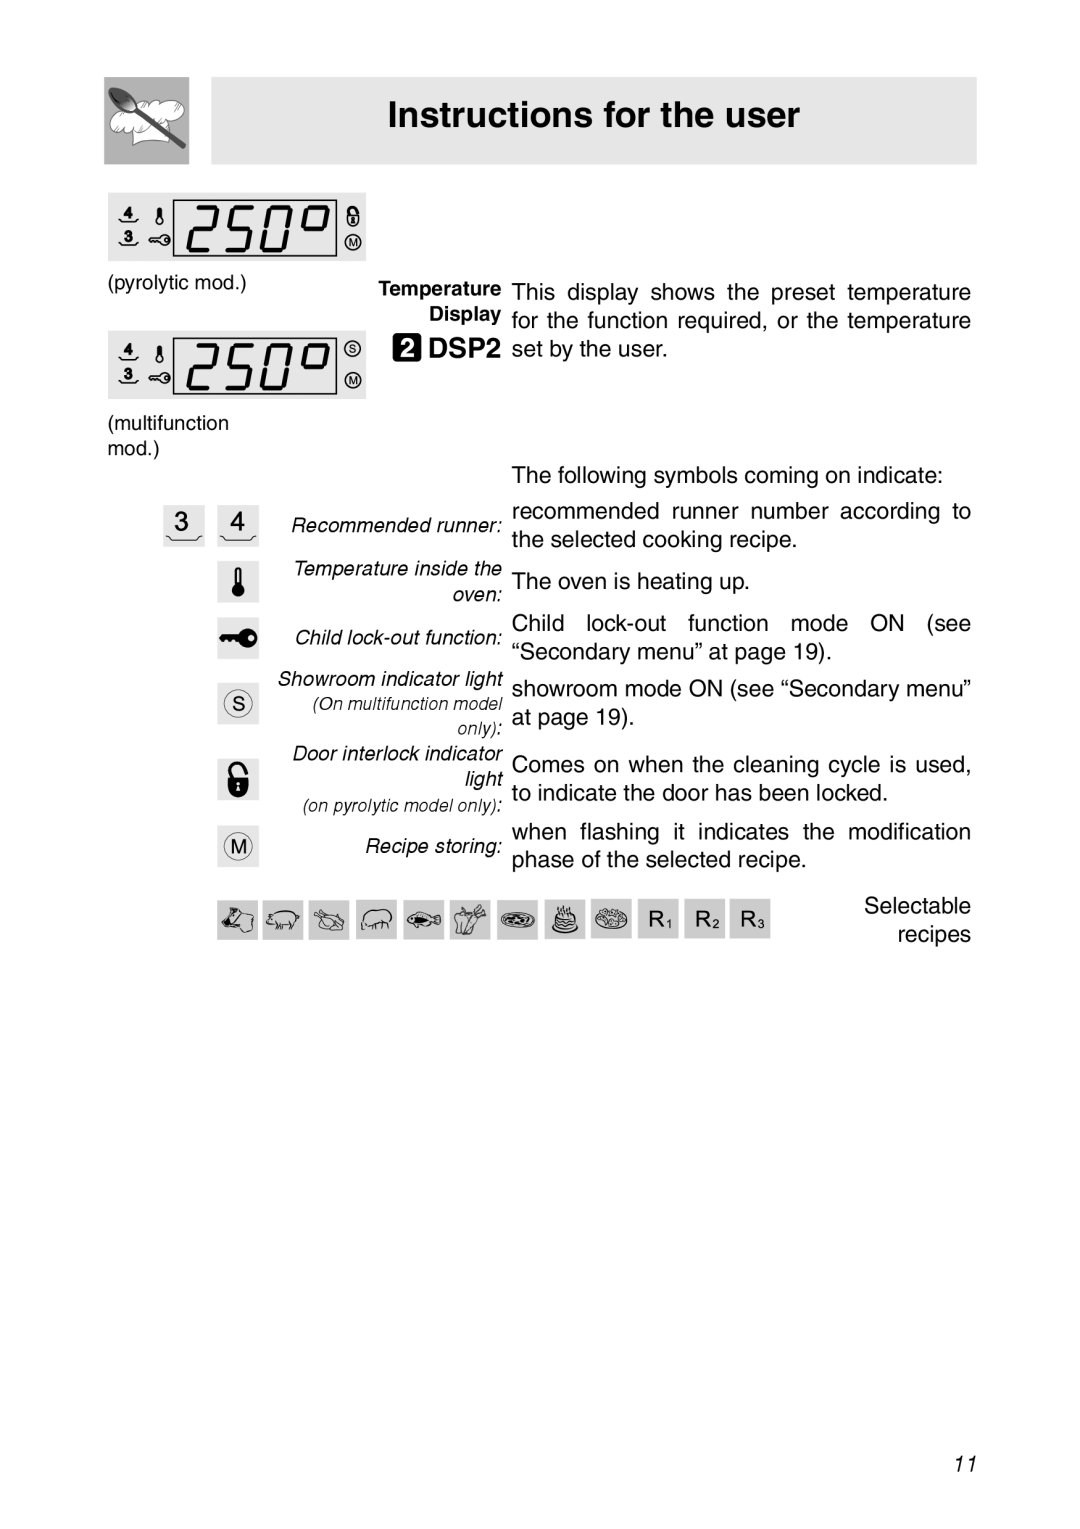 Smeg SC112 manual Instructions for the user, pyrolytic mod, Temperature This display shows the preset temperature 